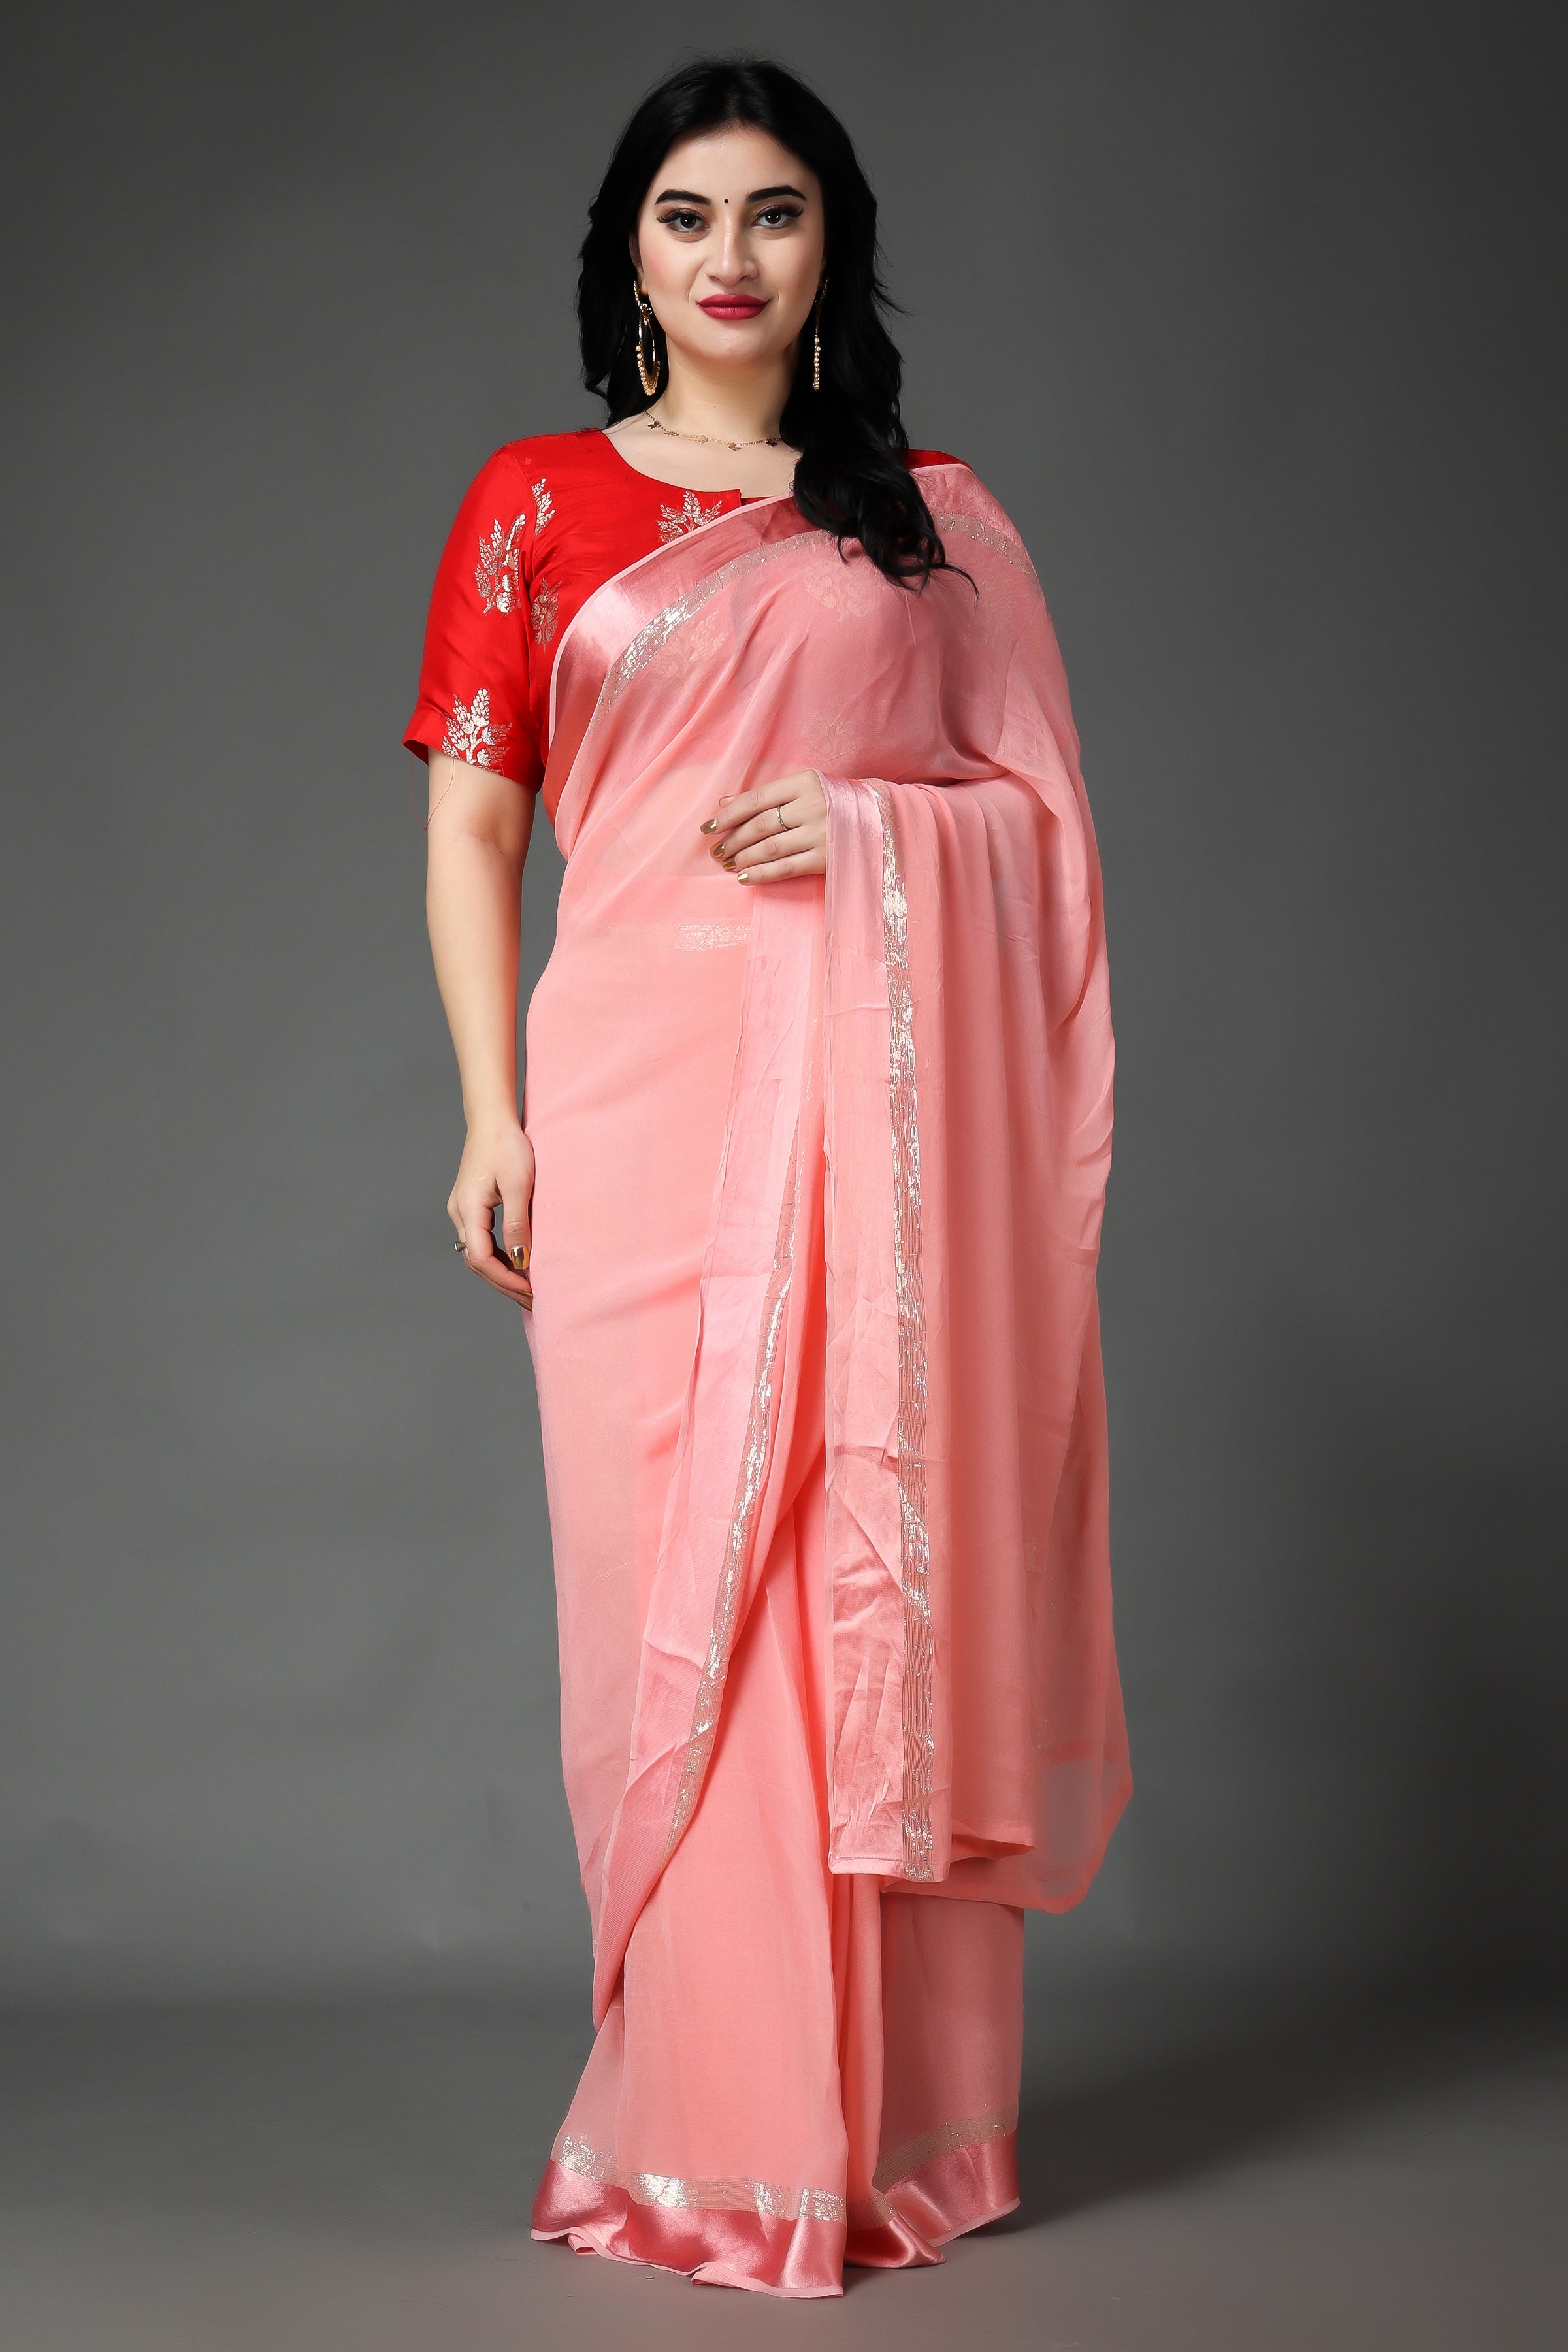 How to choose blouse for my saree? – Fabcurate